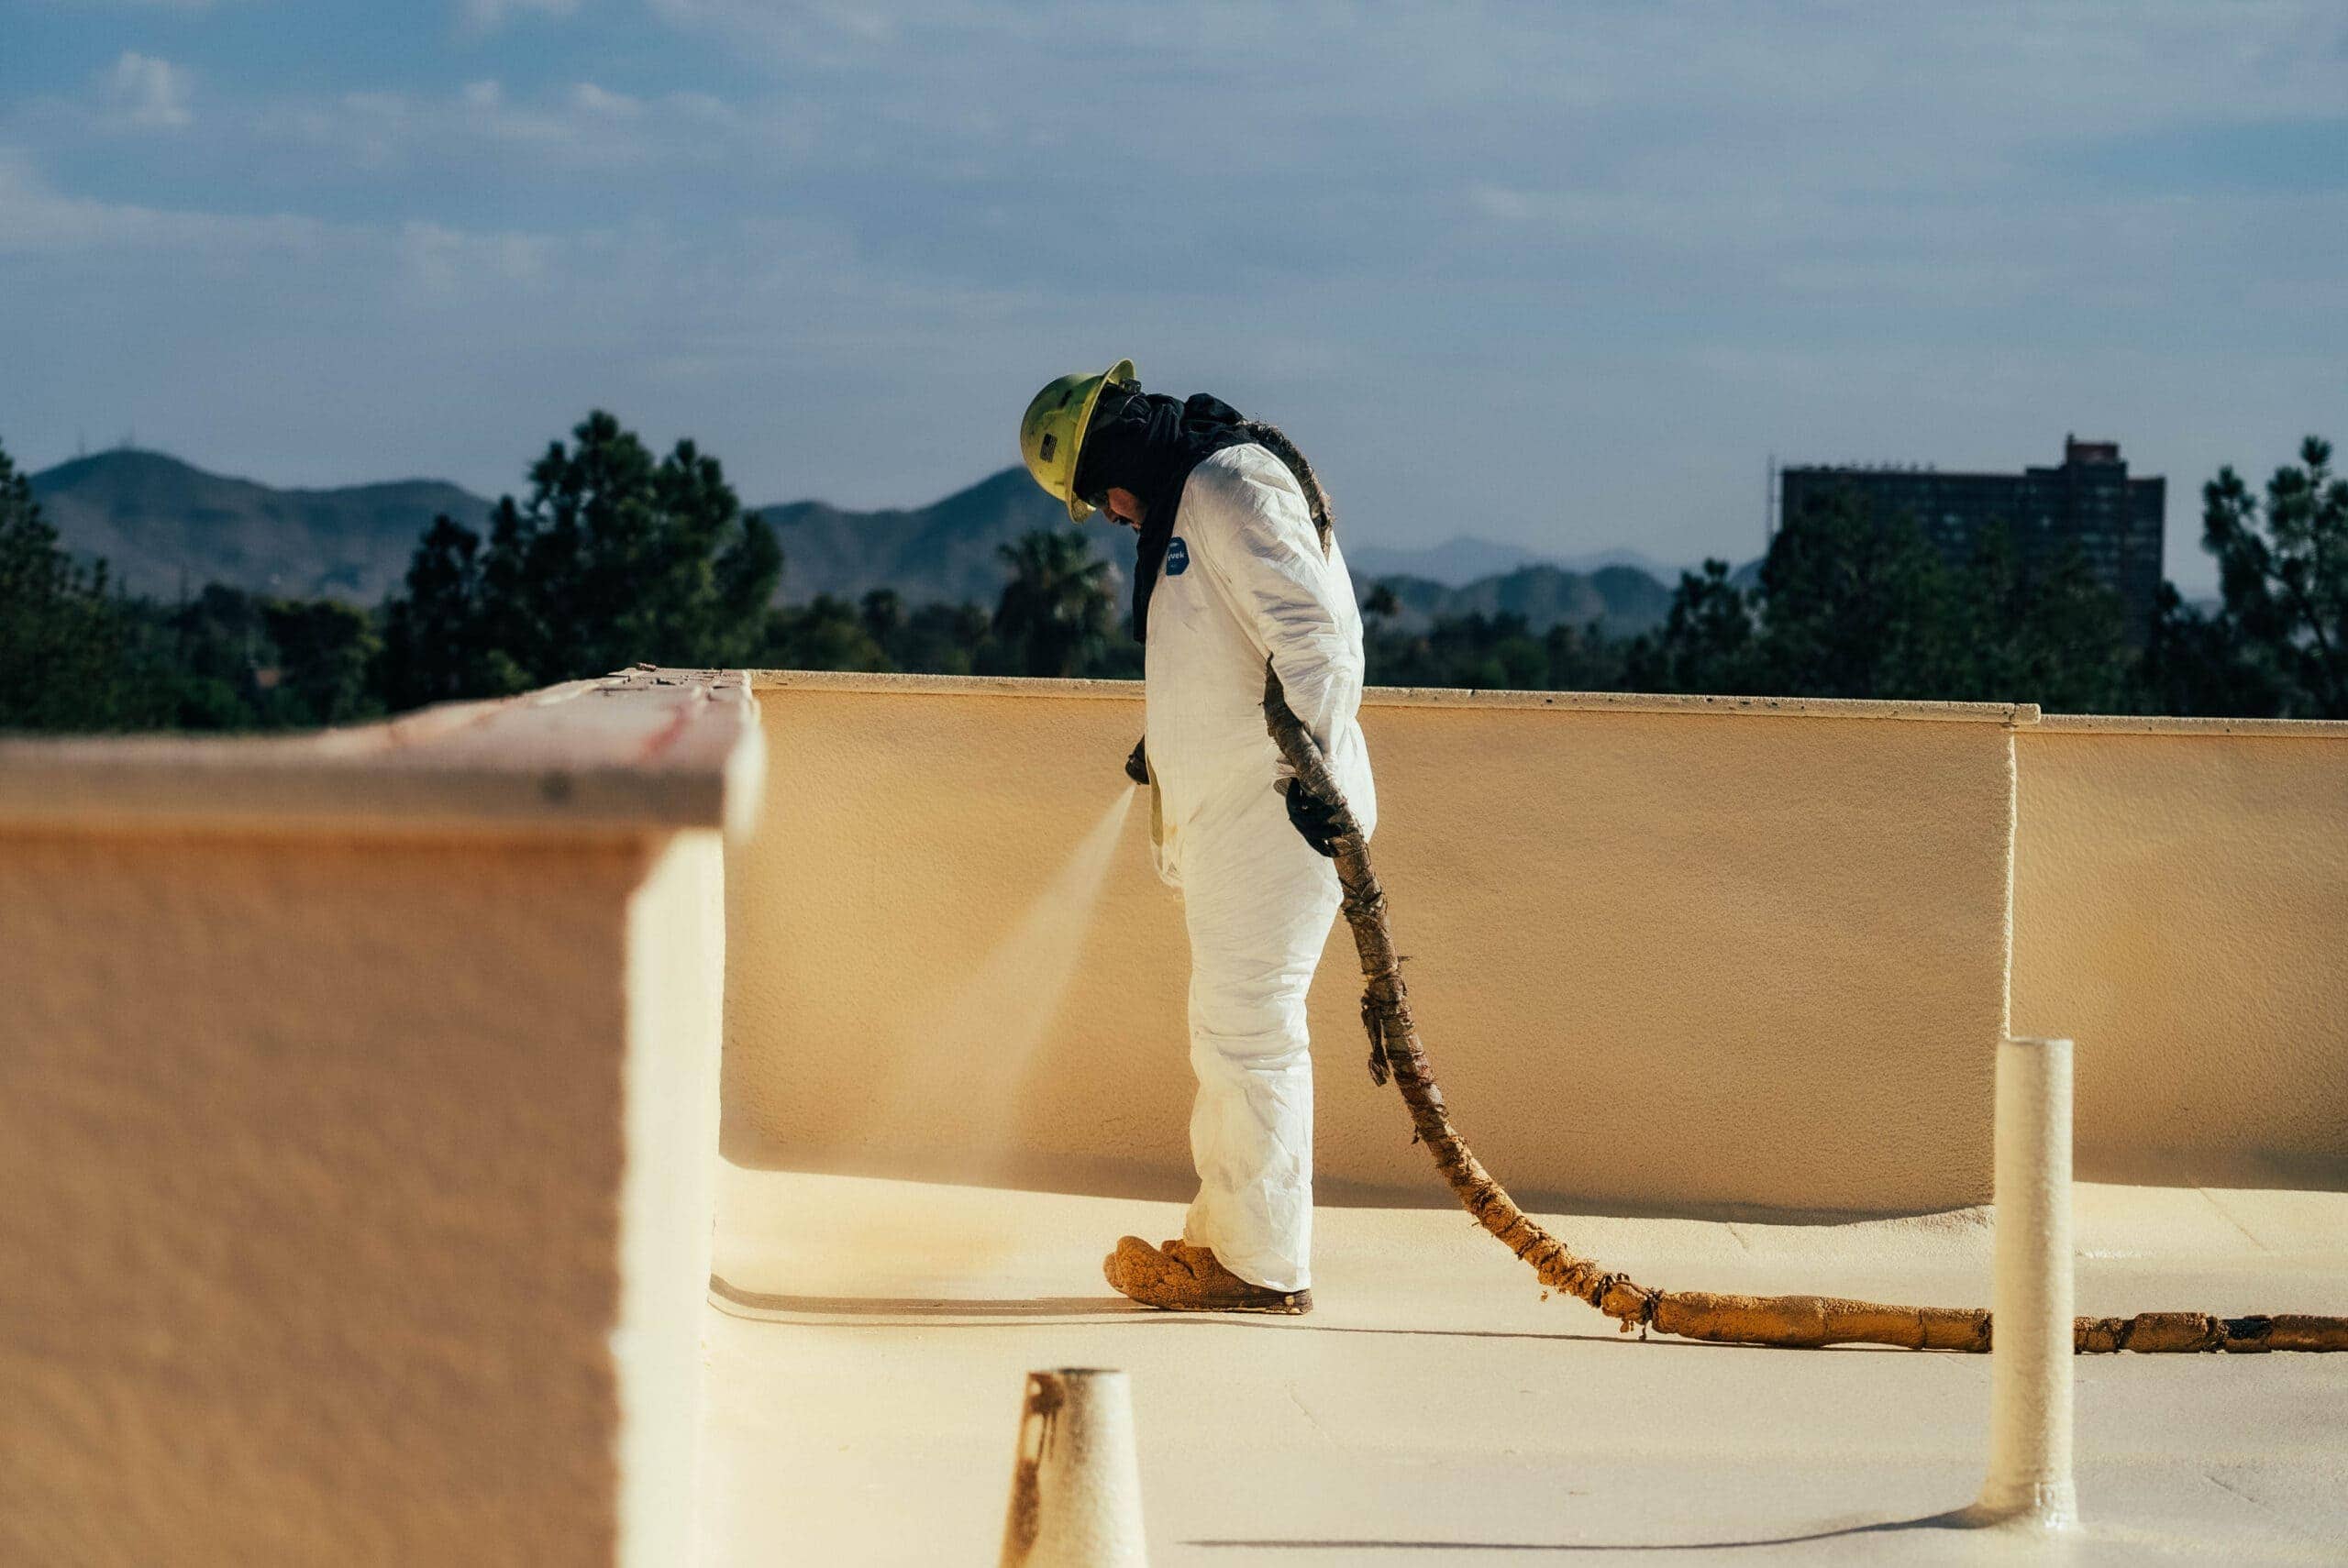 Action shot of a McCormick Ranch roofer meticulously spraying protective foam.